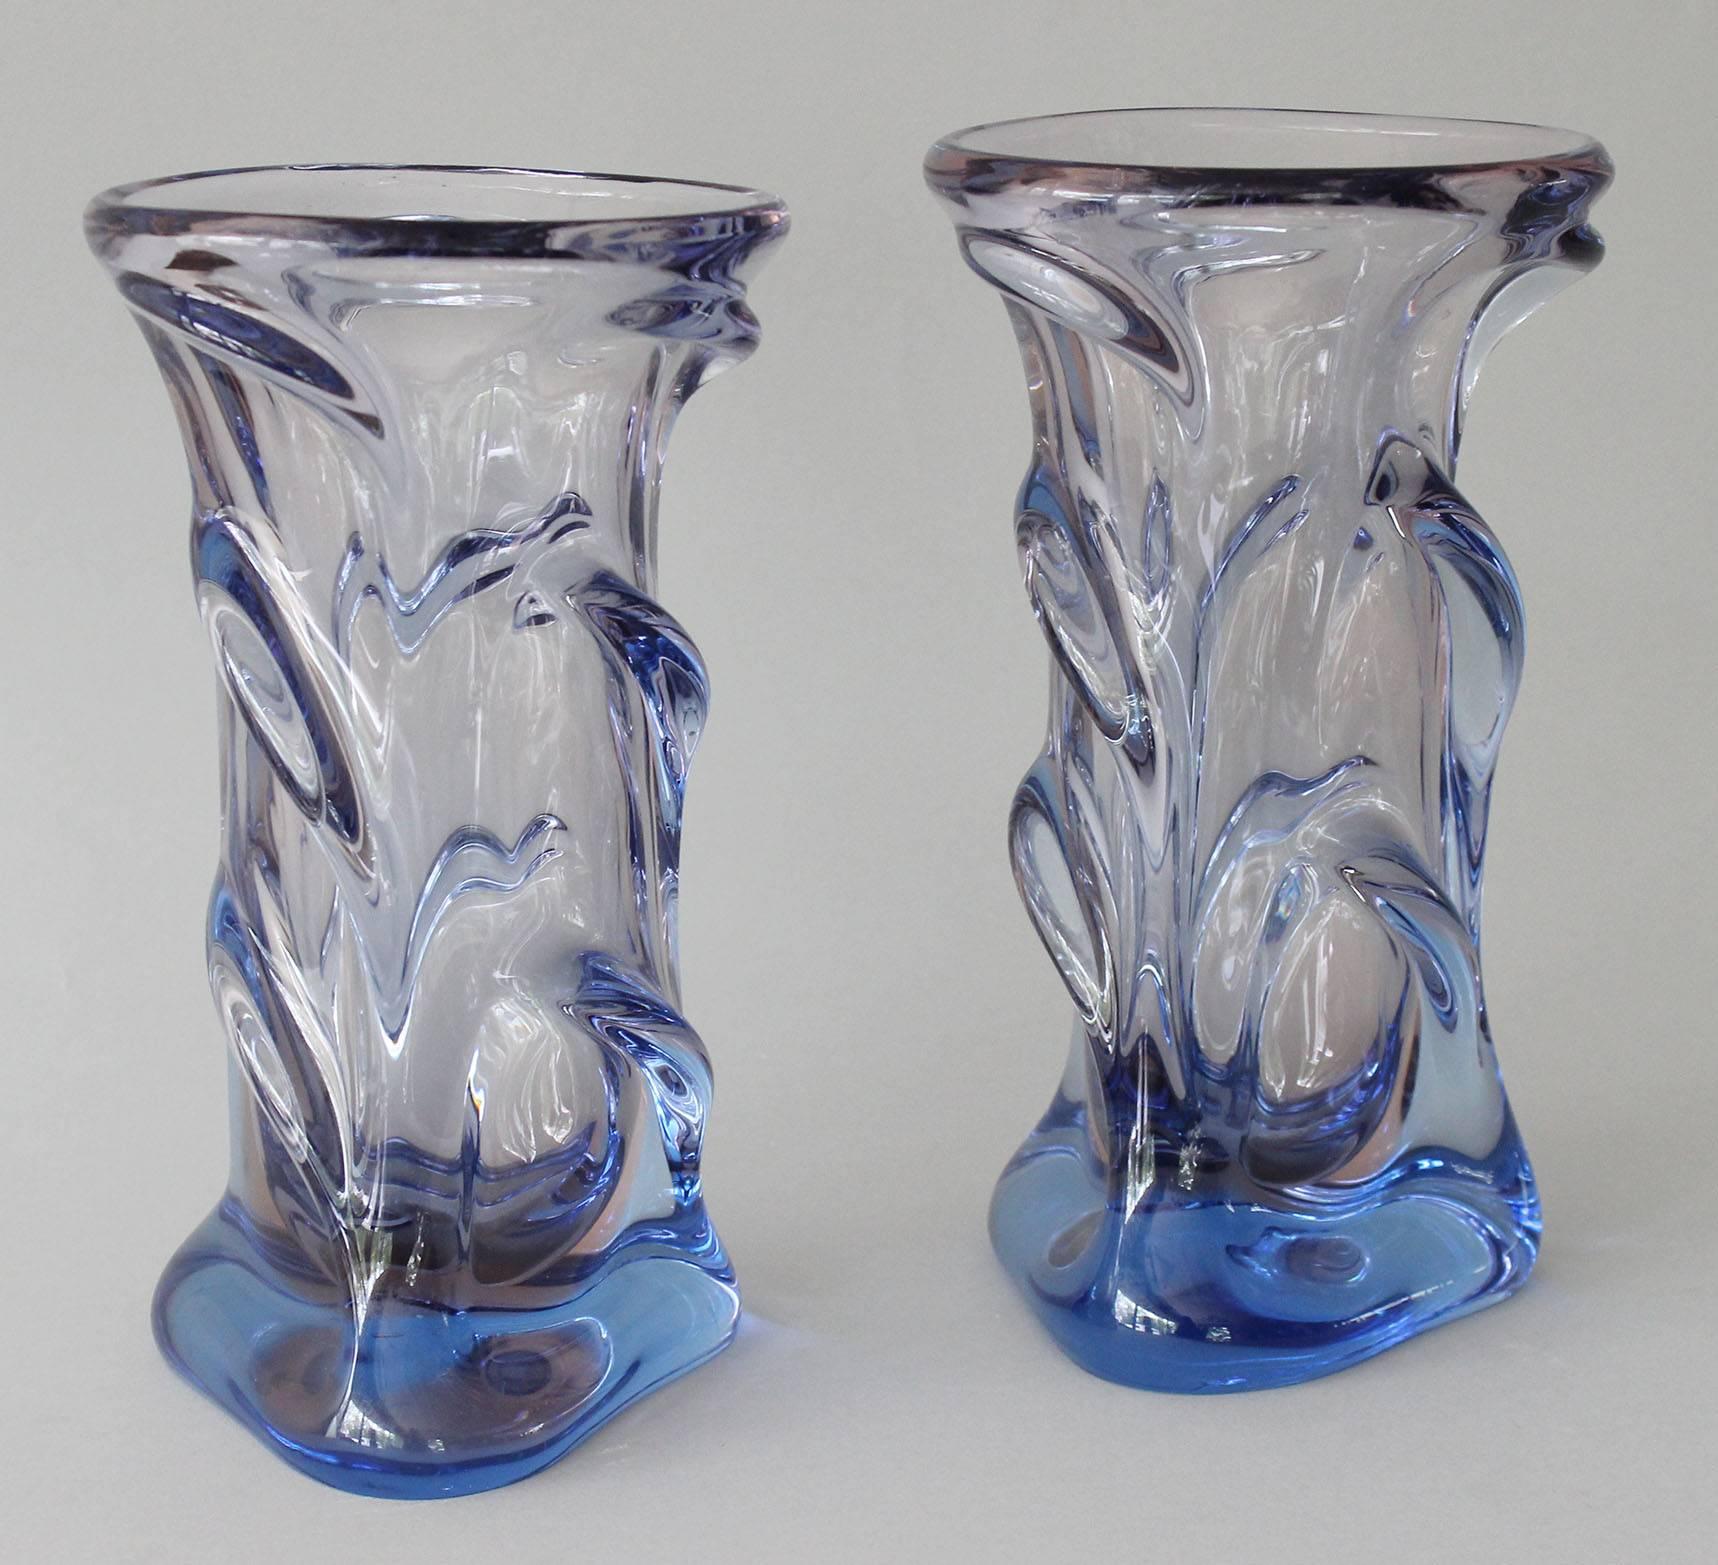 An exceptional pair of translucent blue Swedish blown glass vases.